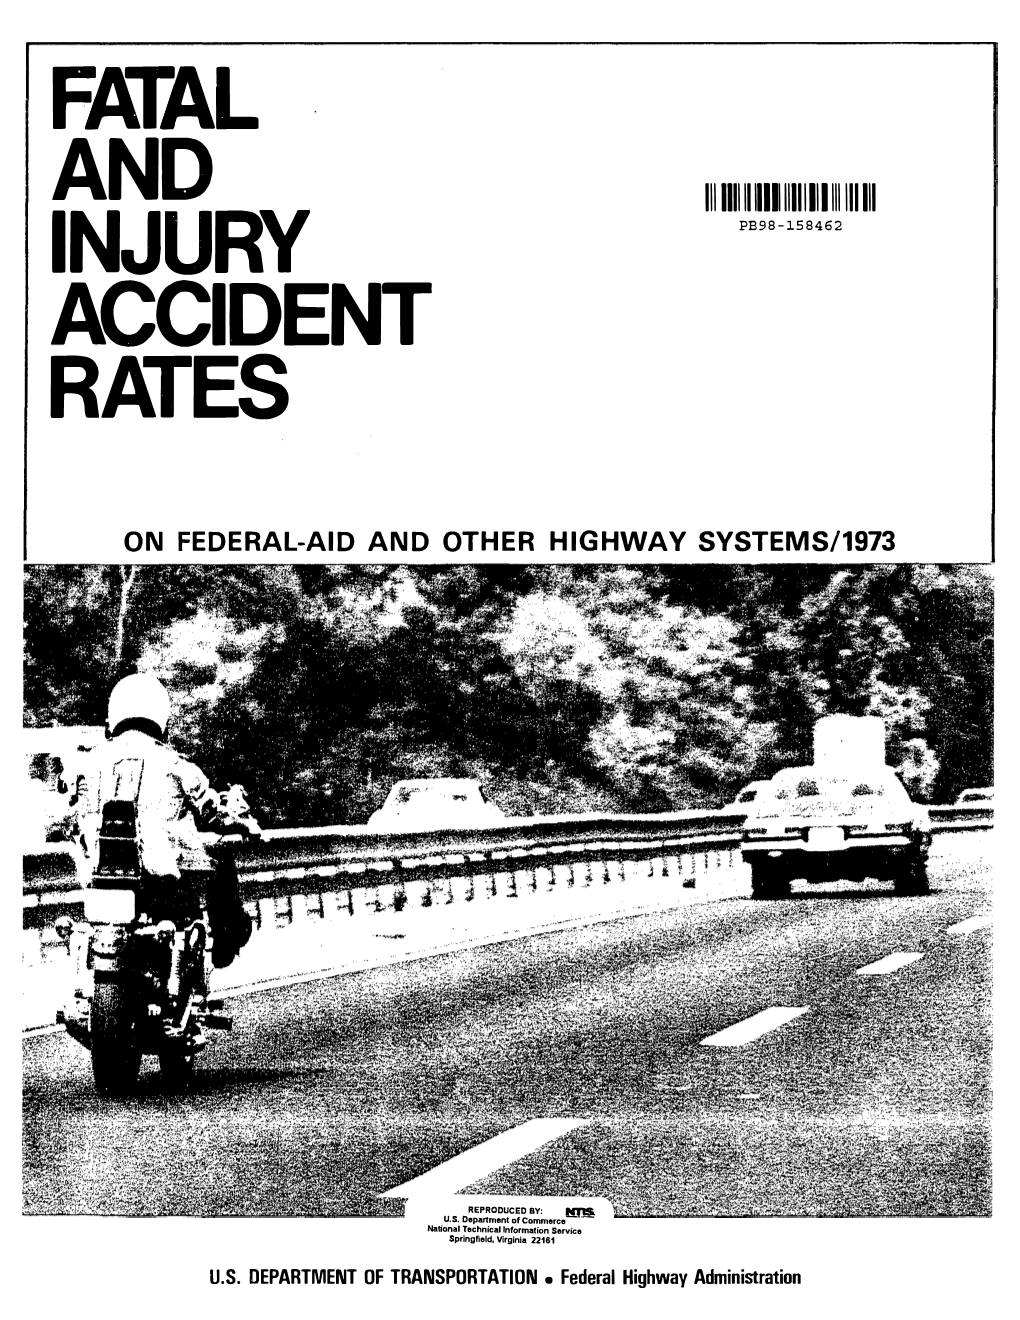 Fatal and Injury Accident Rates on Federal-Aid and Other Highway Systems/1973